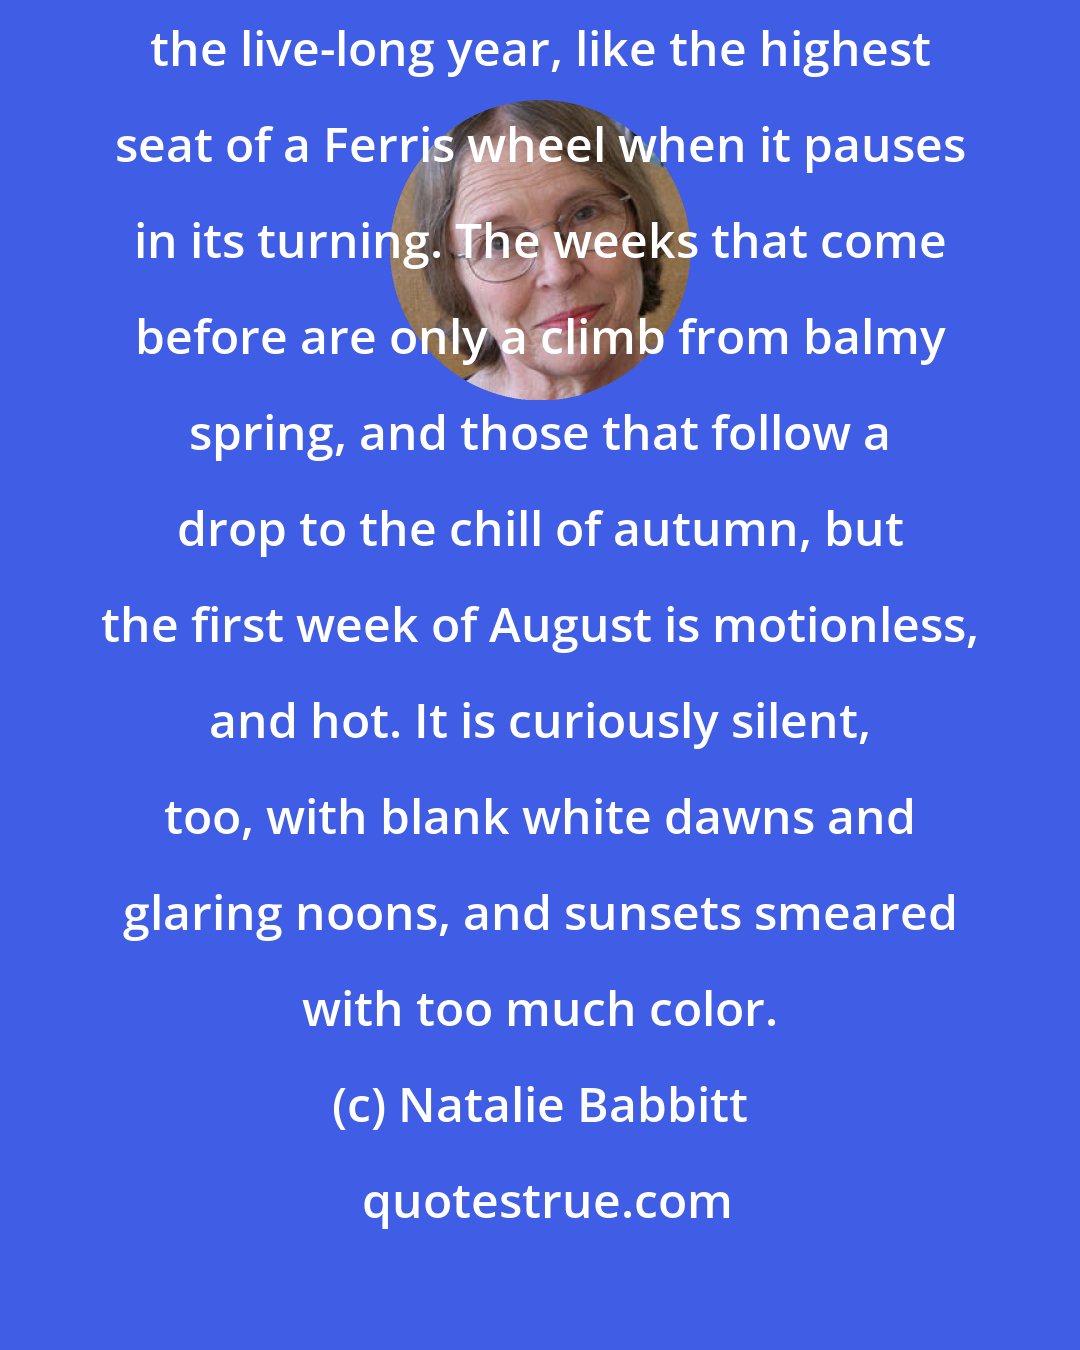 Natalie Babbitt: The first week of August hangs at the very top of summer, the top of the live-long year, like the highest seat of a Ferris wheel when it pauses in its turning. The weeks that come before are only a climb from balmy spring, and those that follow a drop to the chill of autumn, but the first week of August is motionless, and hot. It is curiously silent, too, with blank white dawns and glaring noons, and sunsets smeared with too much color.